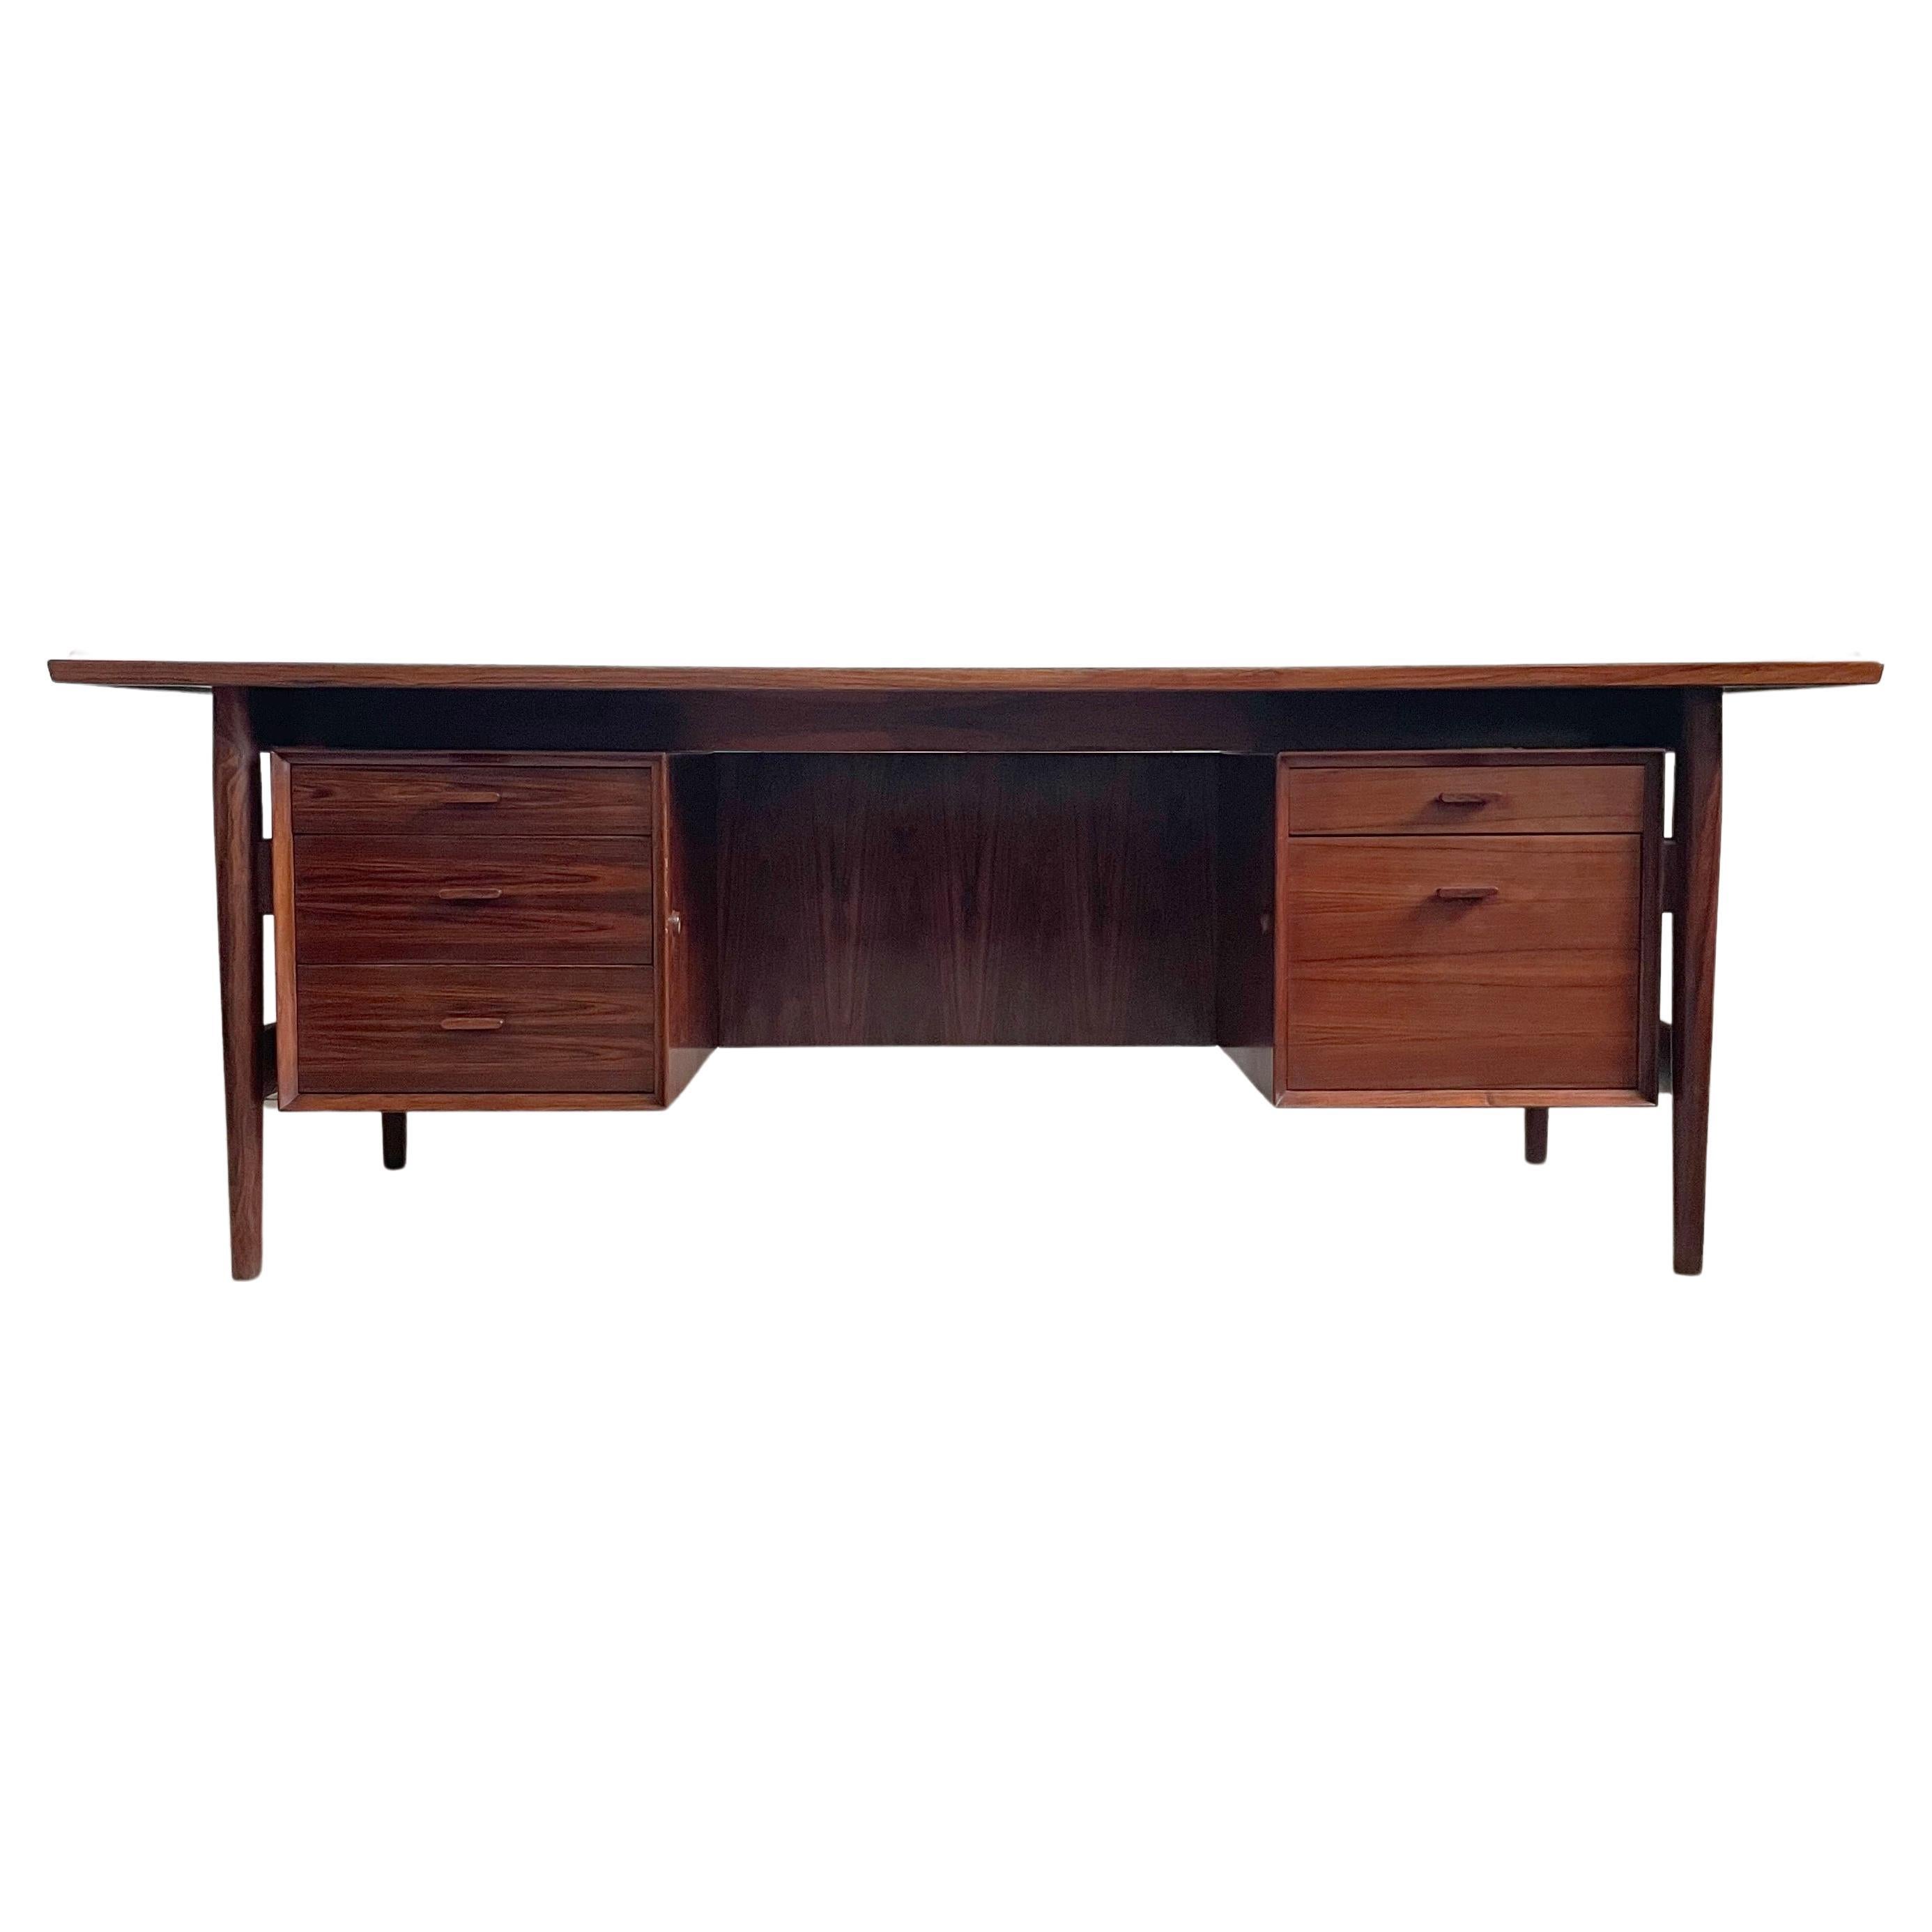 Model 207 desk by Arne Vodder is a well known classic of Danish Modern furniture and highly sought after.
Manufactured by Sibast in the 1960’s.

The desk is made out of solid wood, mostly of exotic Brazilian or Rio Rosewood and some parts of the